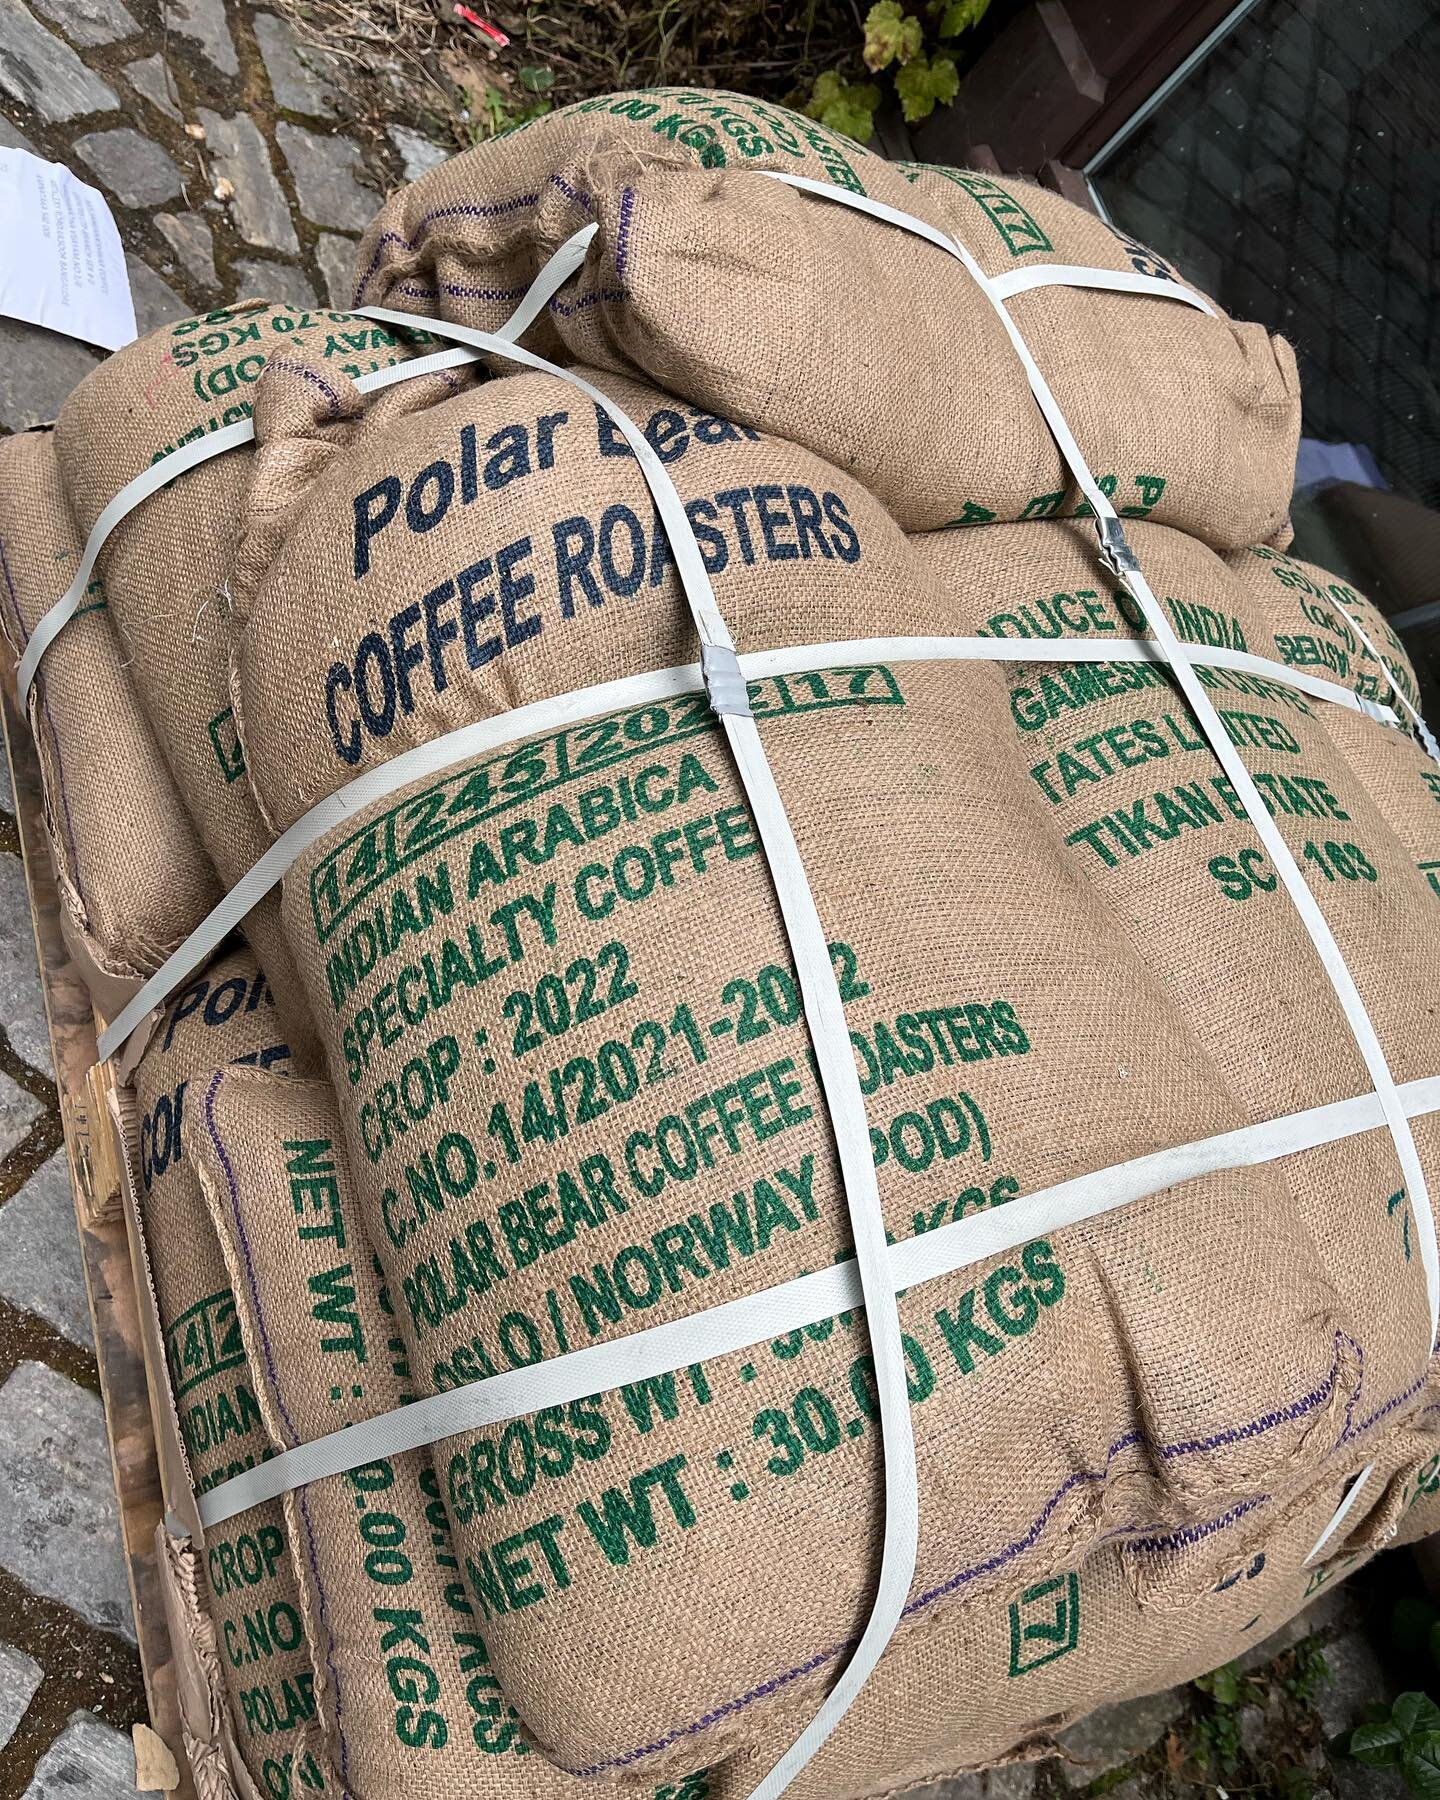 &hellip;.direct trade with @sangameshwar_coffee ; coffee grown among wild fig trees at the Attikan estate in southern India is what we roast for our Christmas edition&hellip; #sangameshwar_coffee #directtrade #specialtycoffee #india #trondheim #suppo